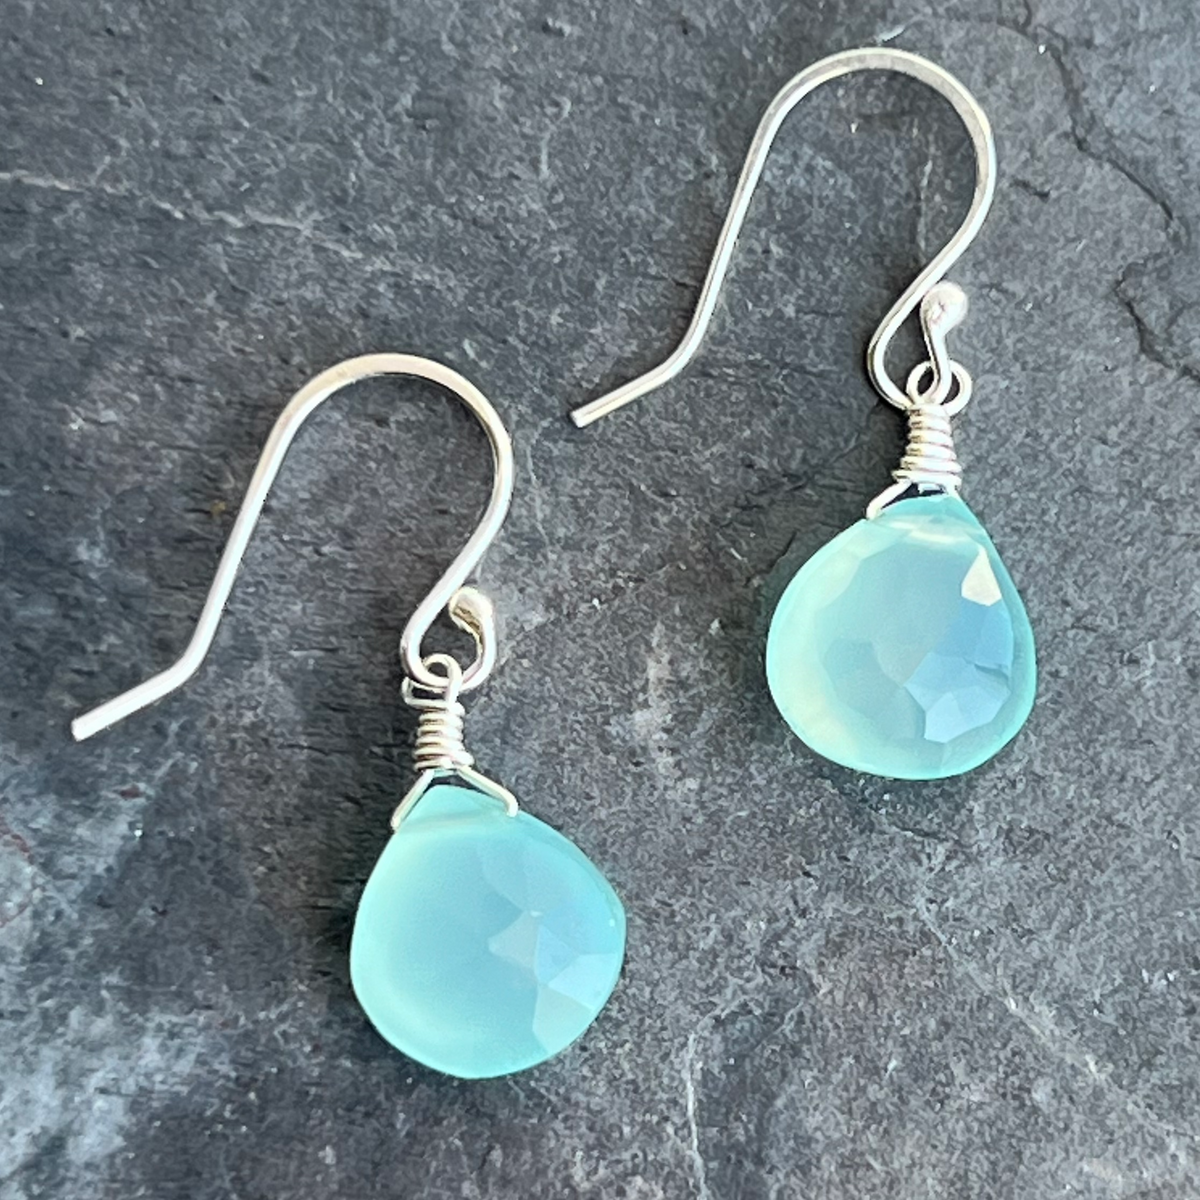 Chalcedony Droplets Sterling Earrings at Garden of Silver.